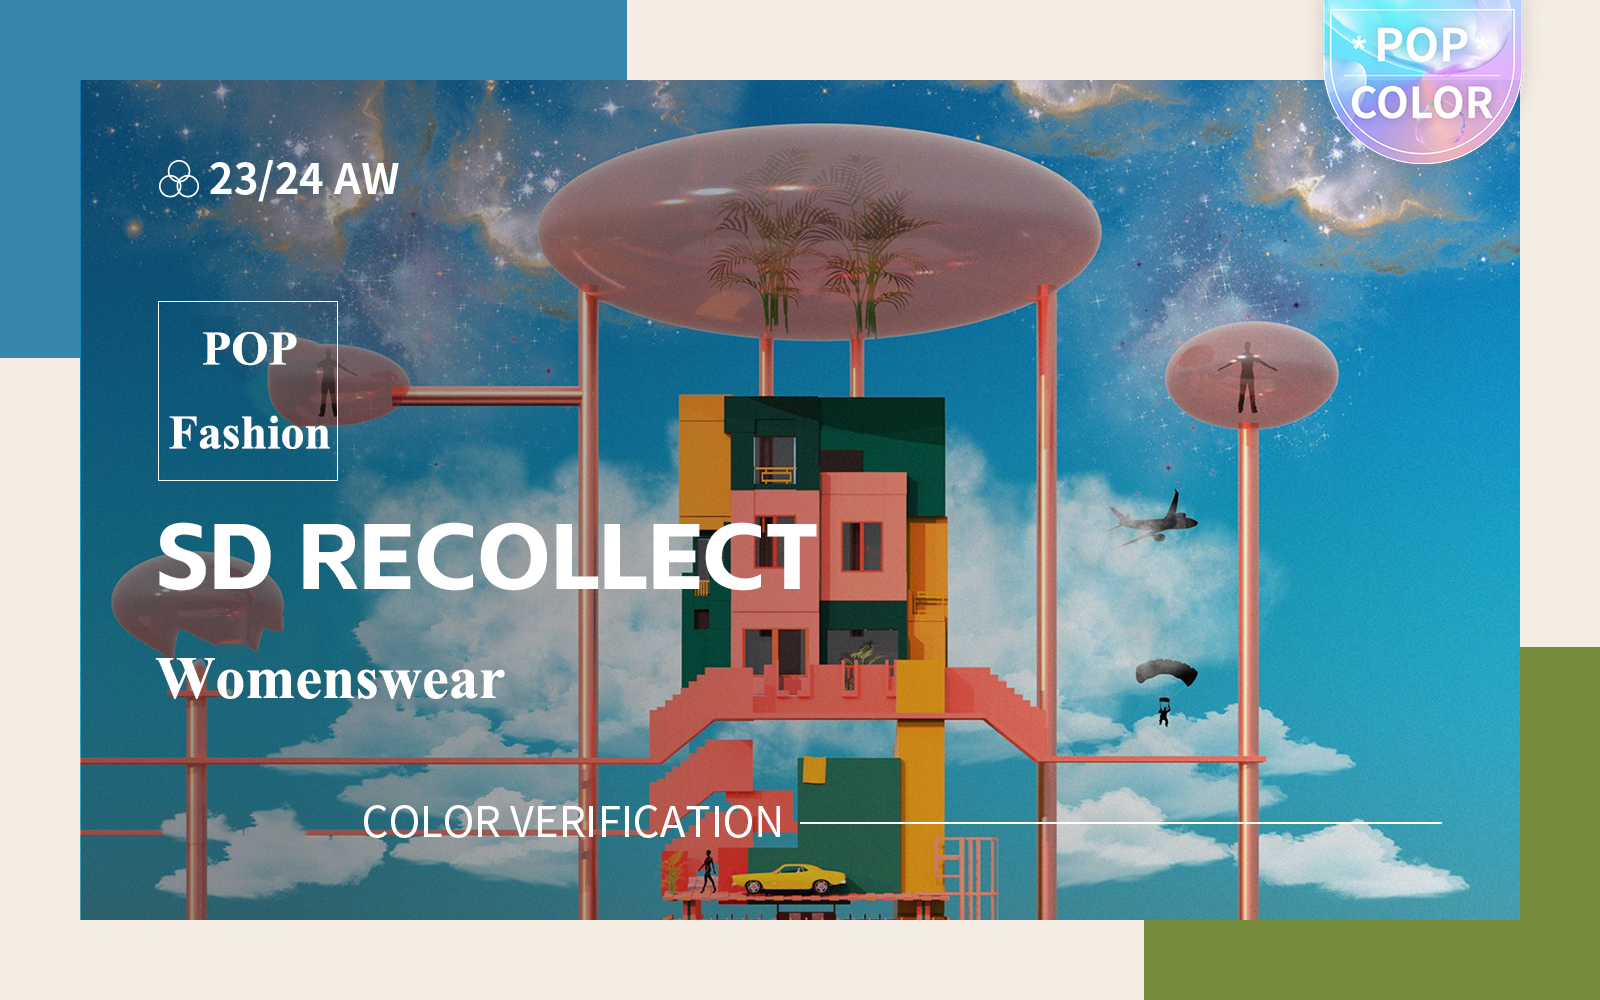 SD Recollect -- The Color Trend Verification of Womenswear